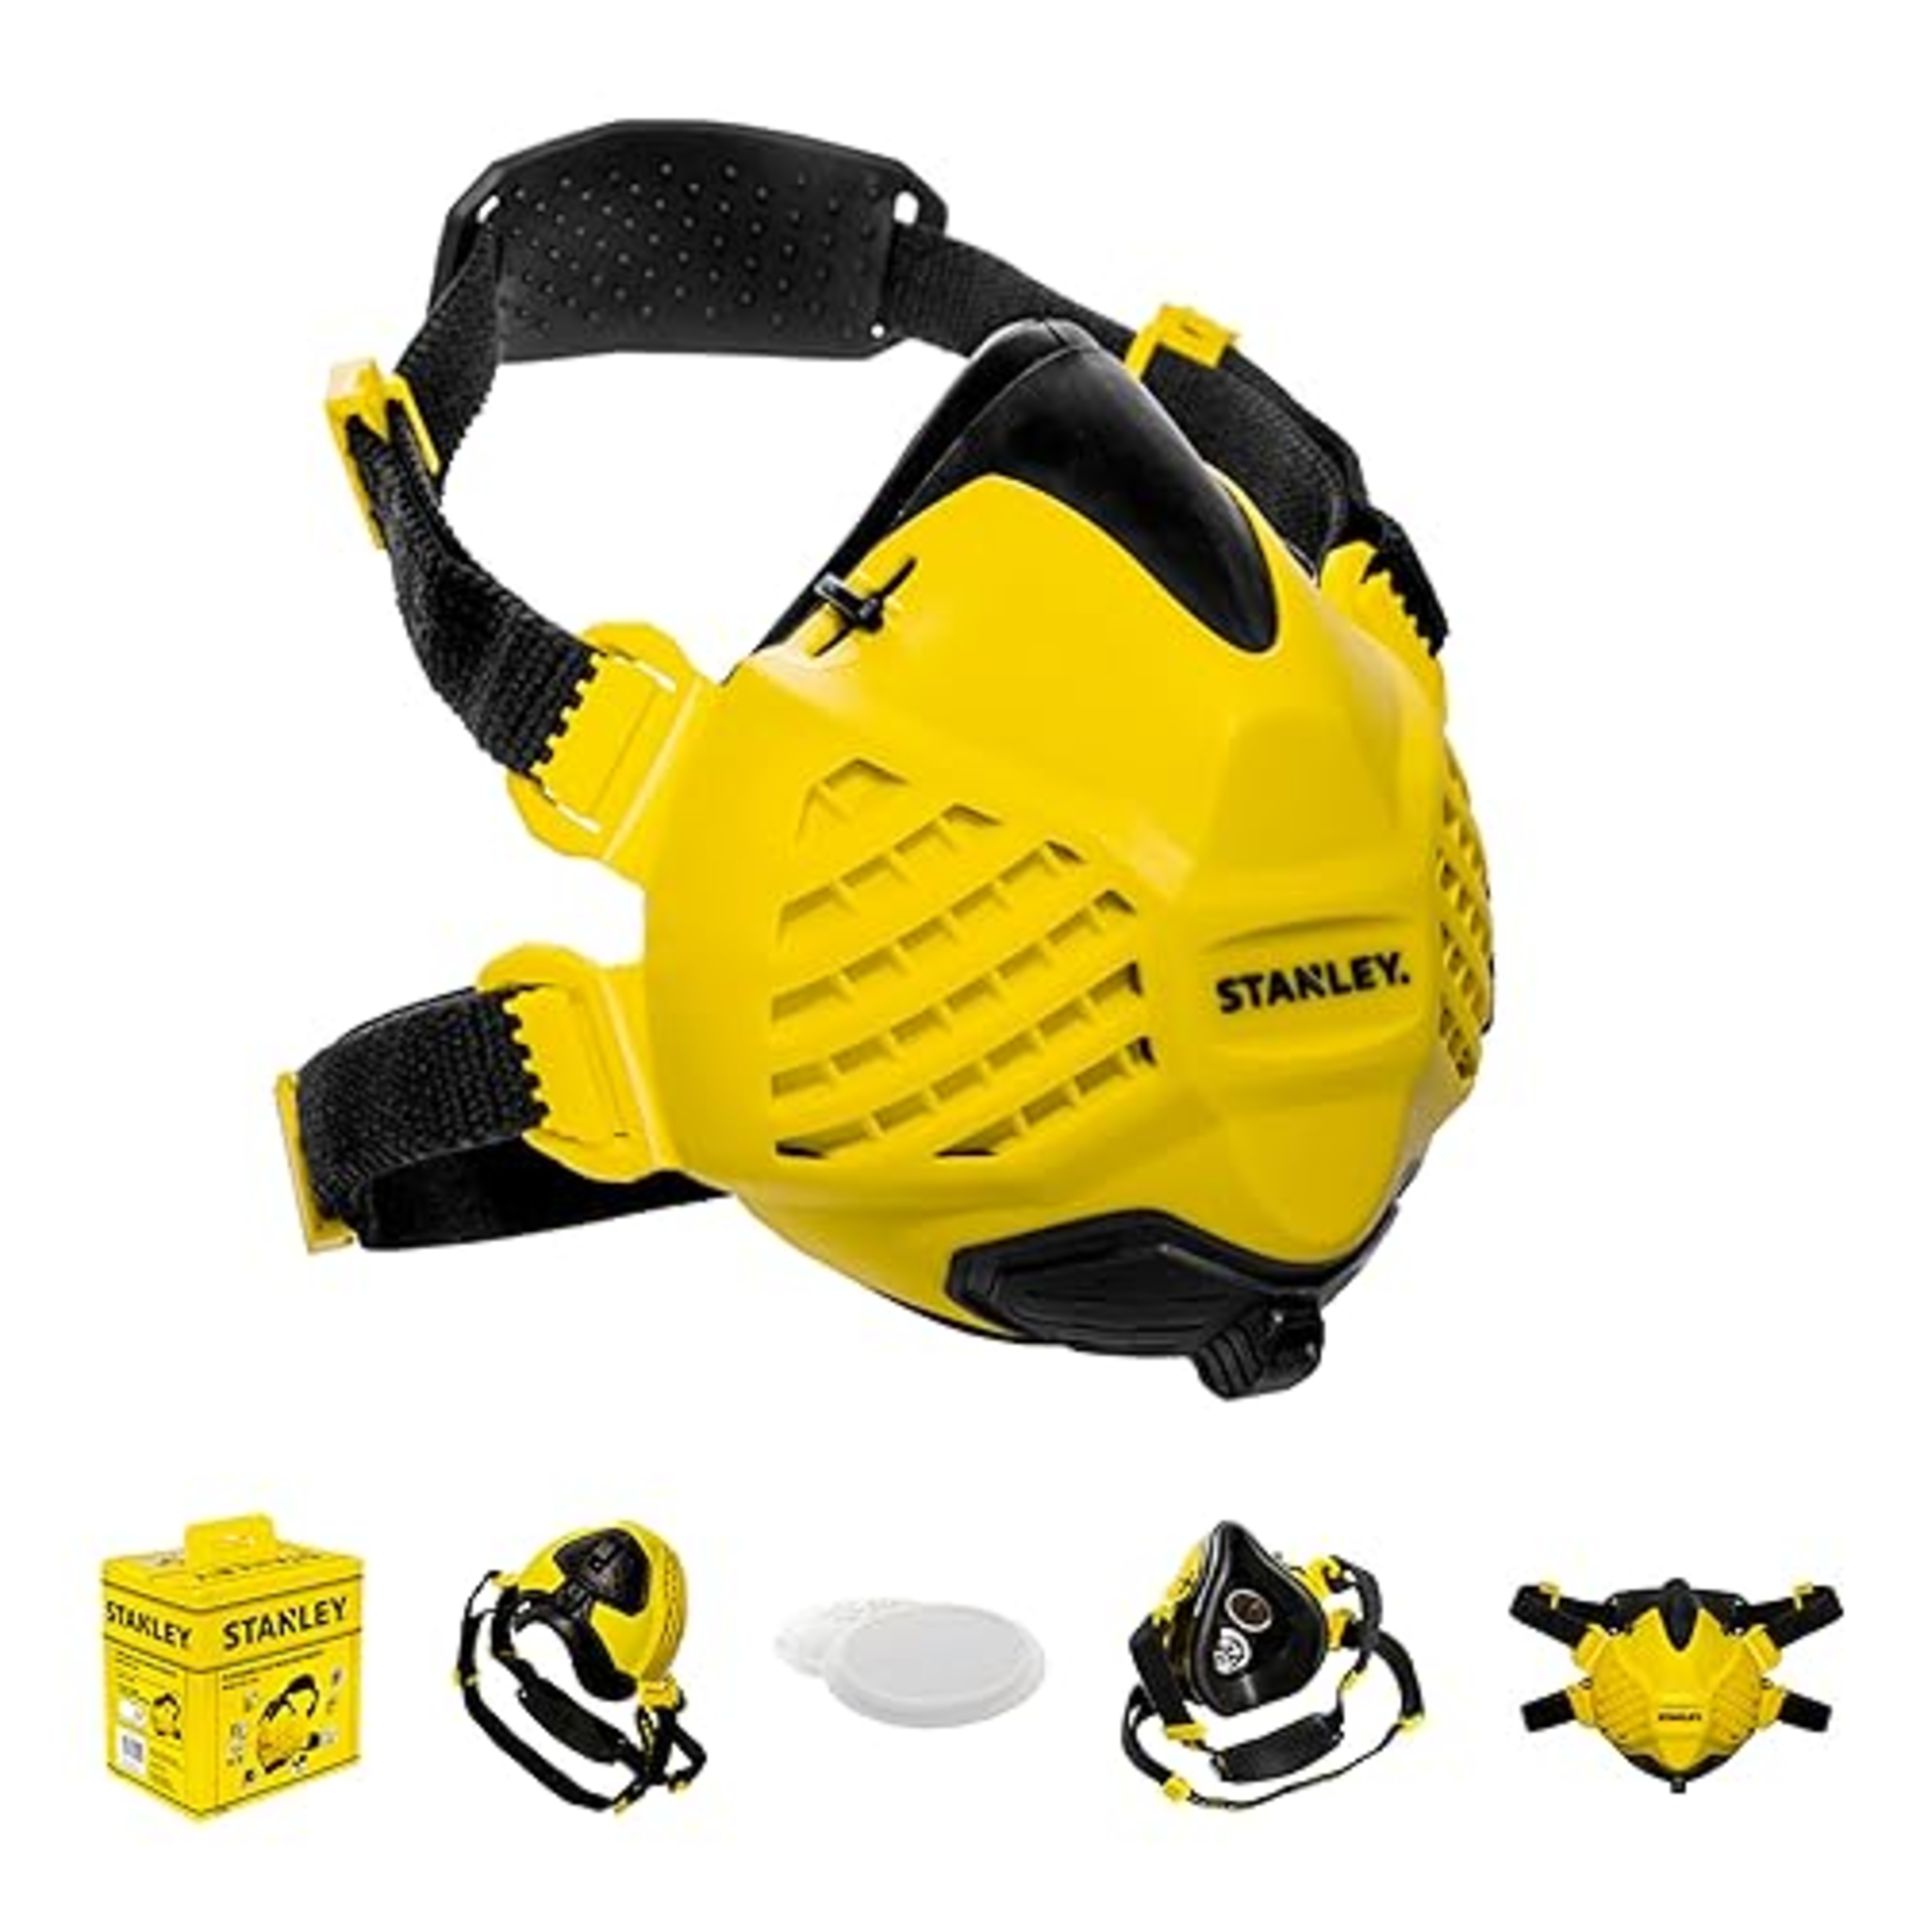 Stanley P3 Dust Mask, Reusable Respirator Mask with Face-Fit-Check Technology & Maximum 99.99% P3 F